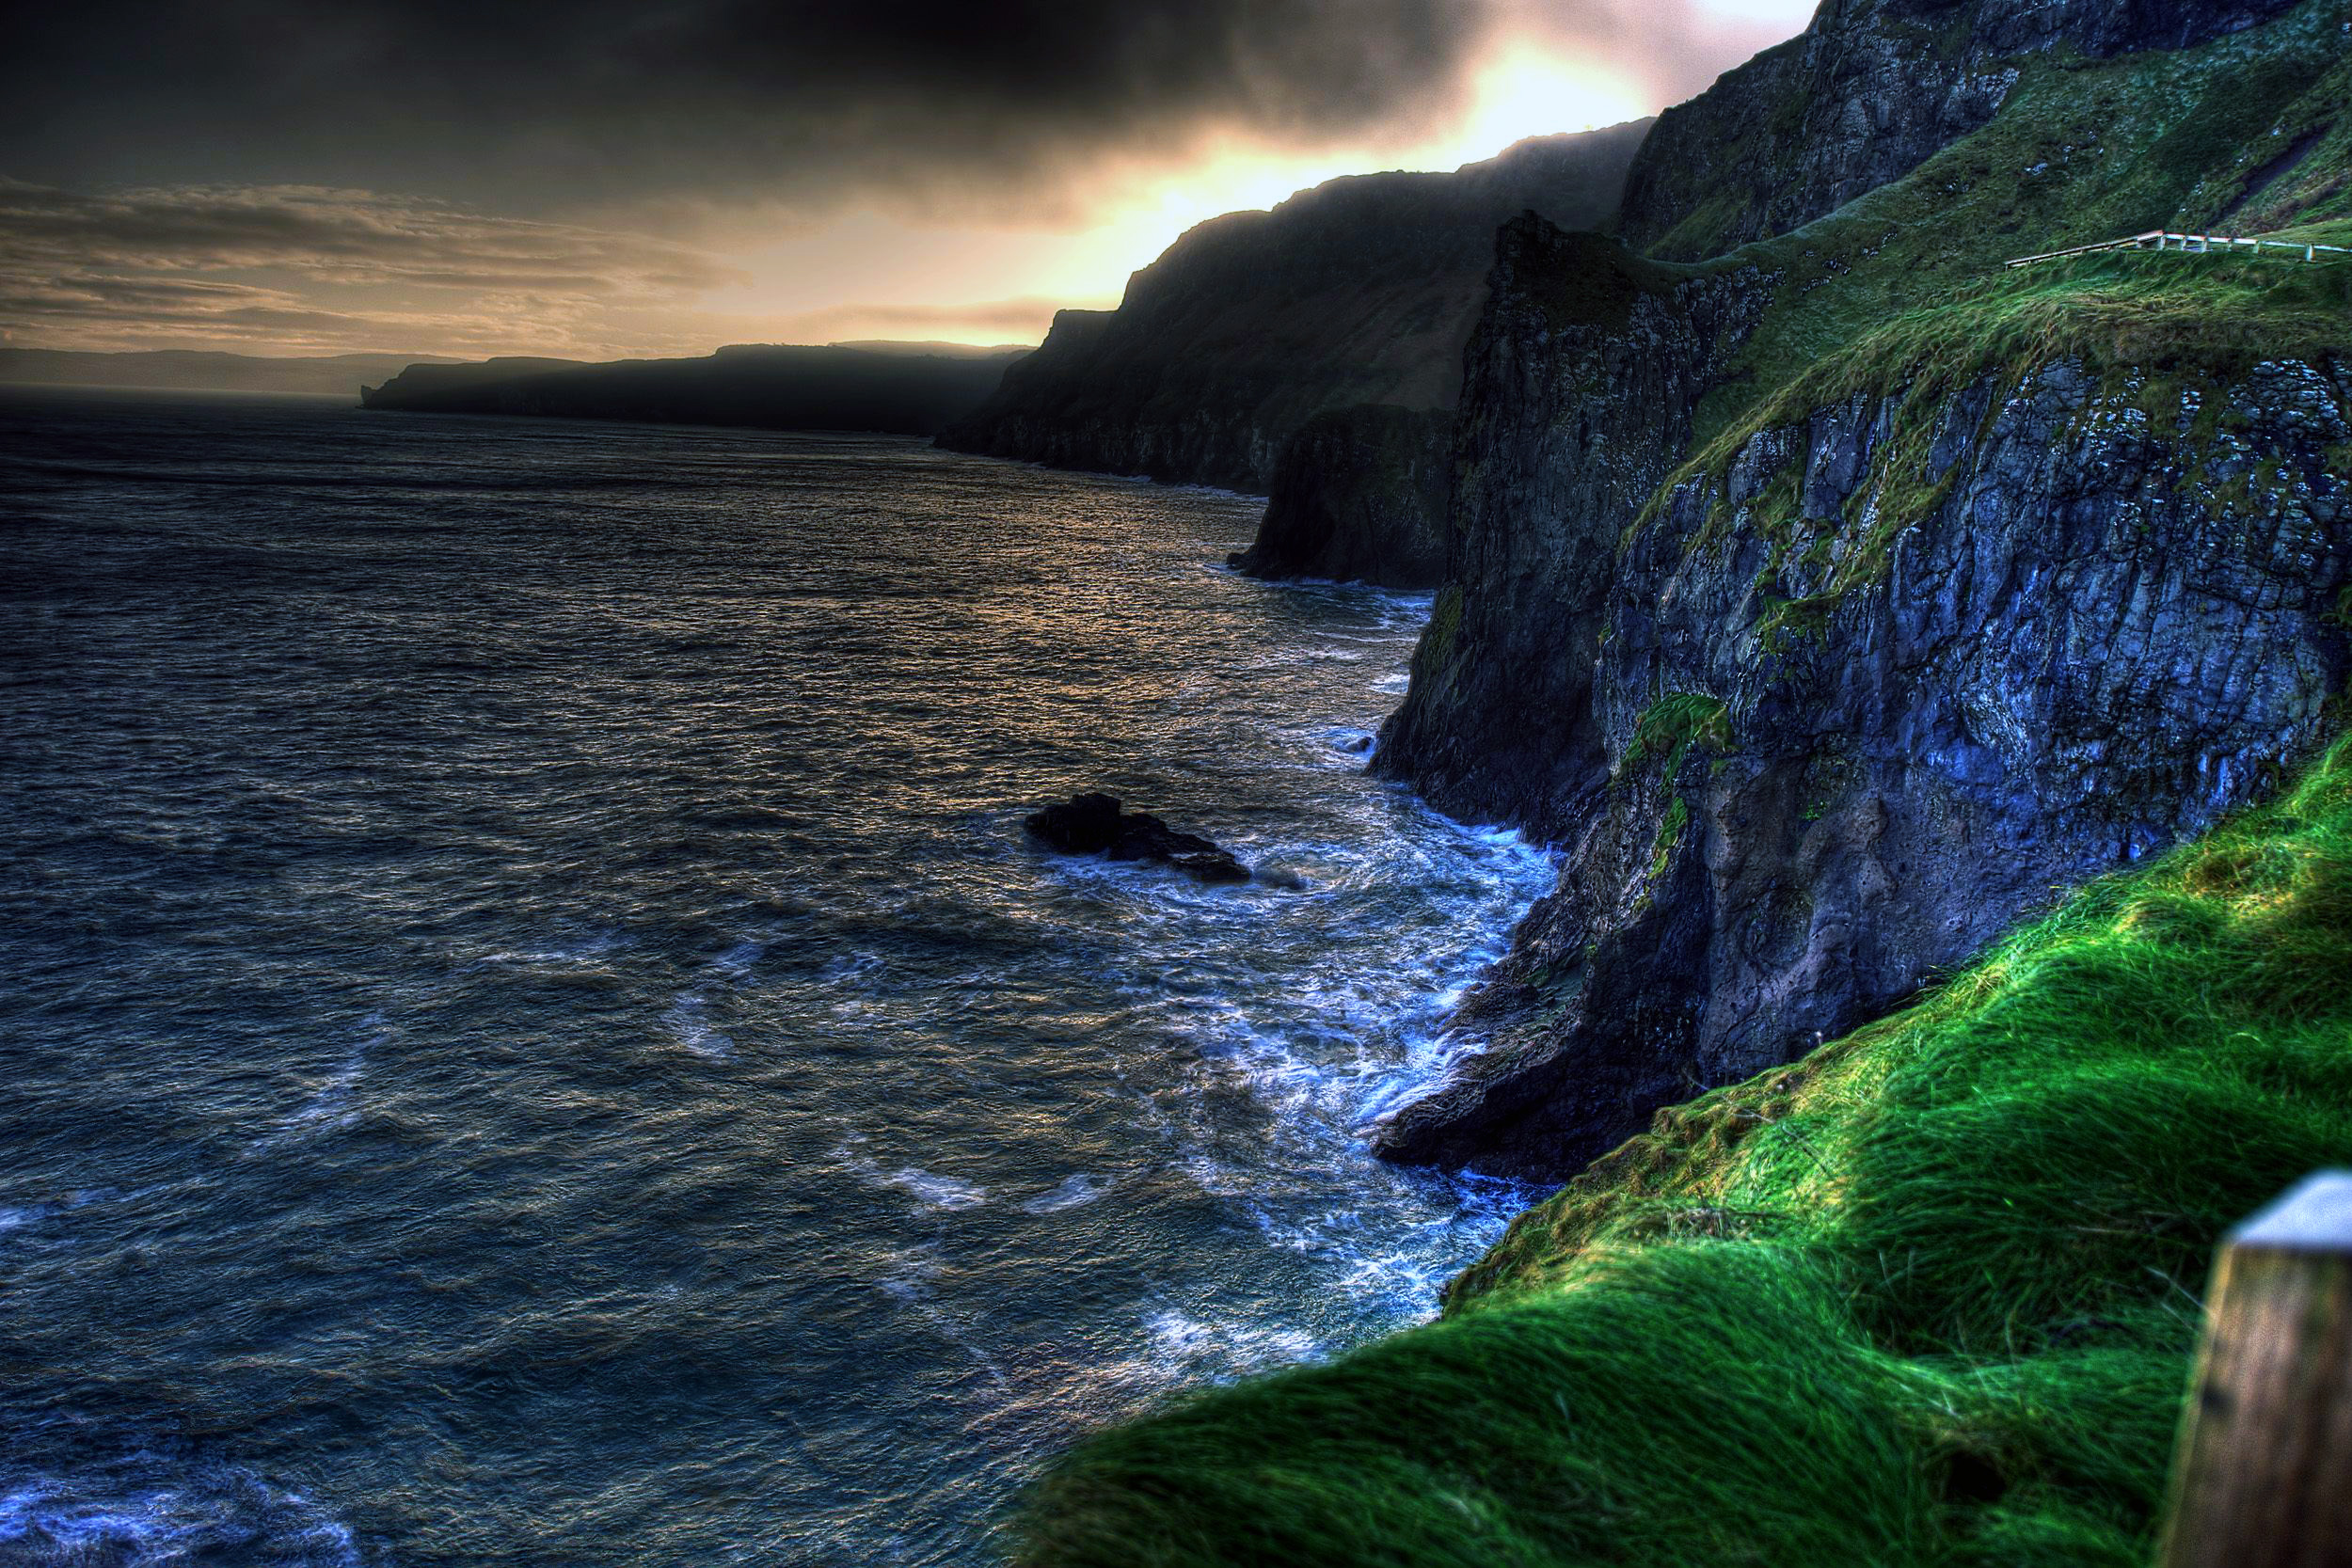 The wallpaper of amazing coastline of Ballintoy in Northern